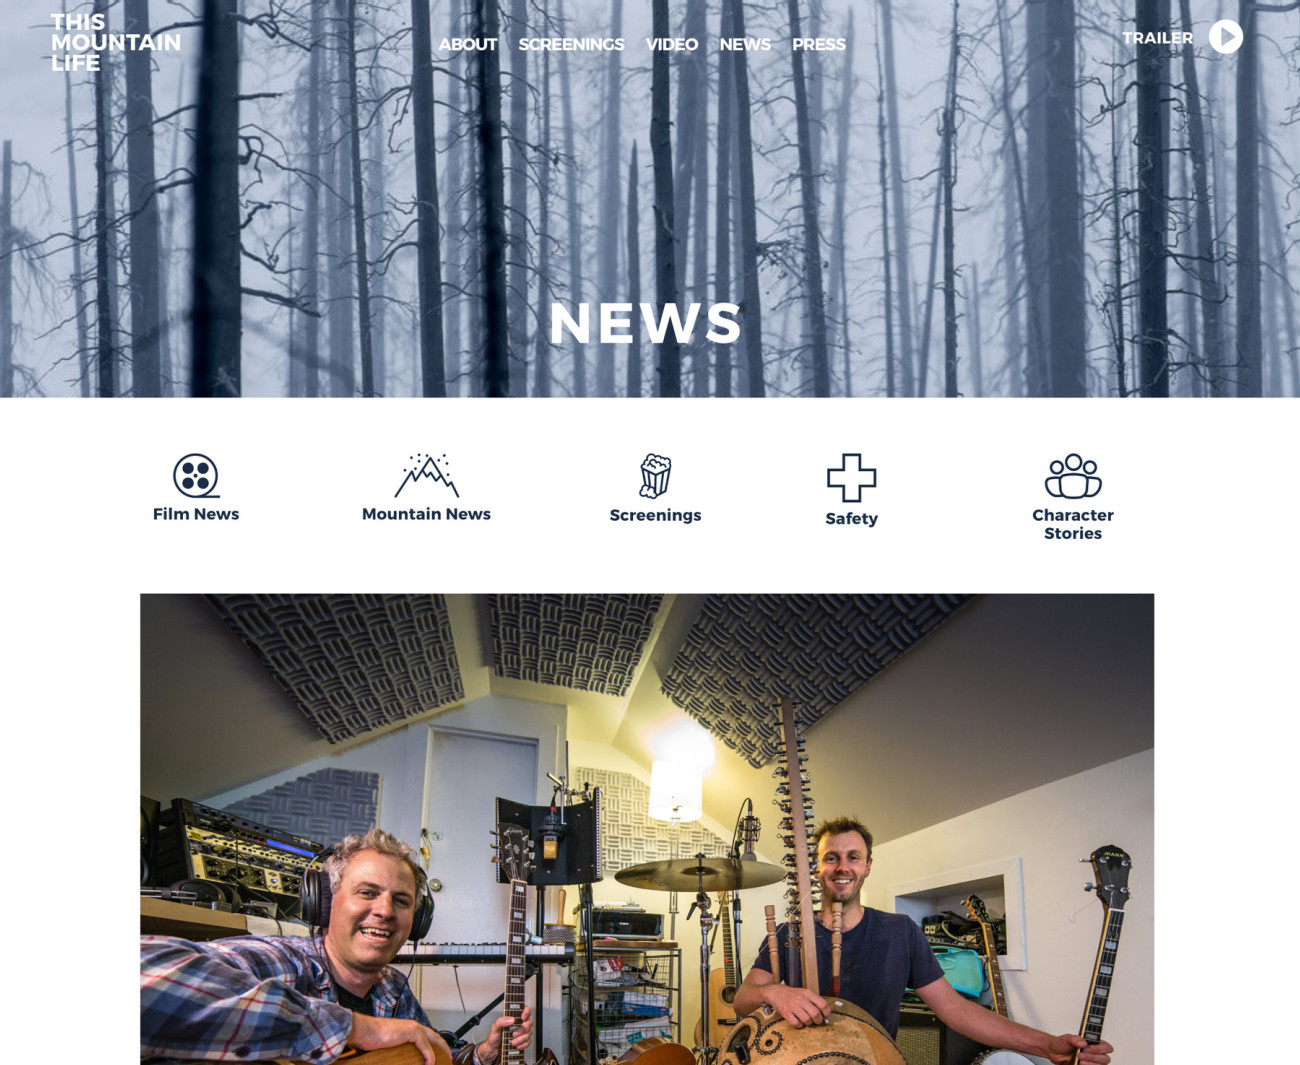 Screenshot of This Mountain Life website News page